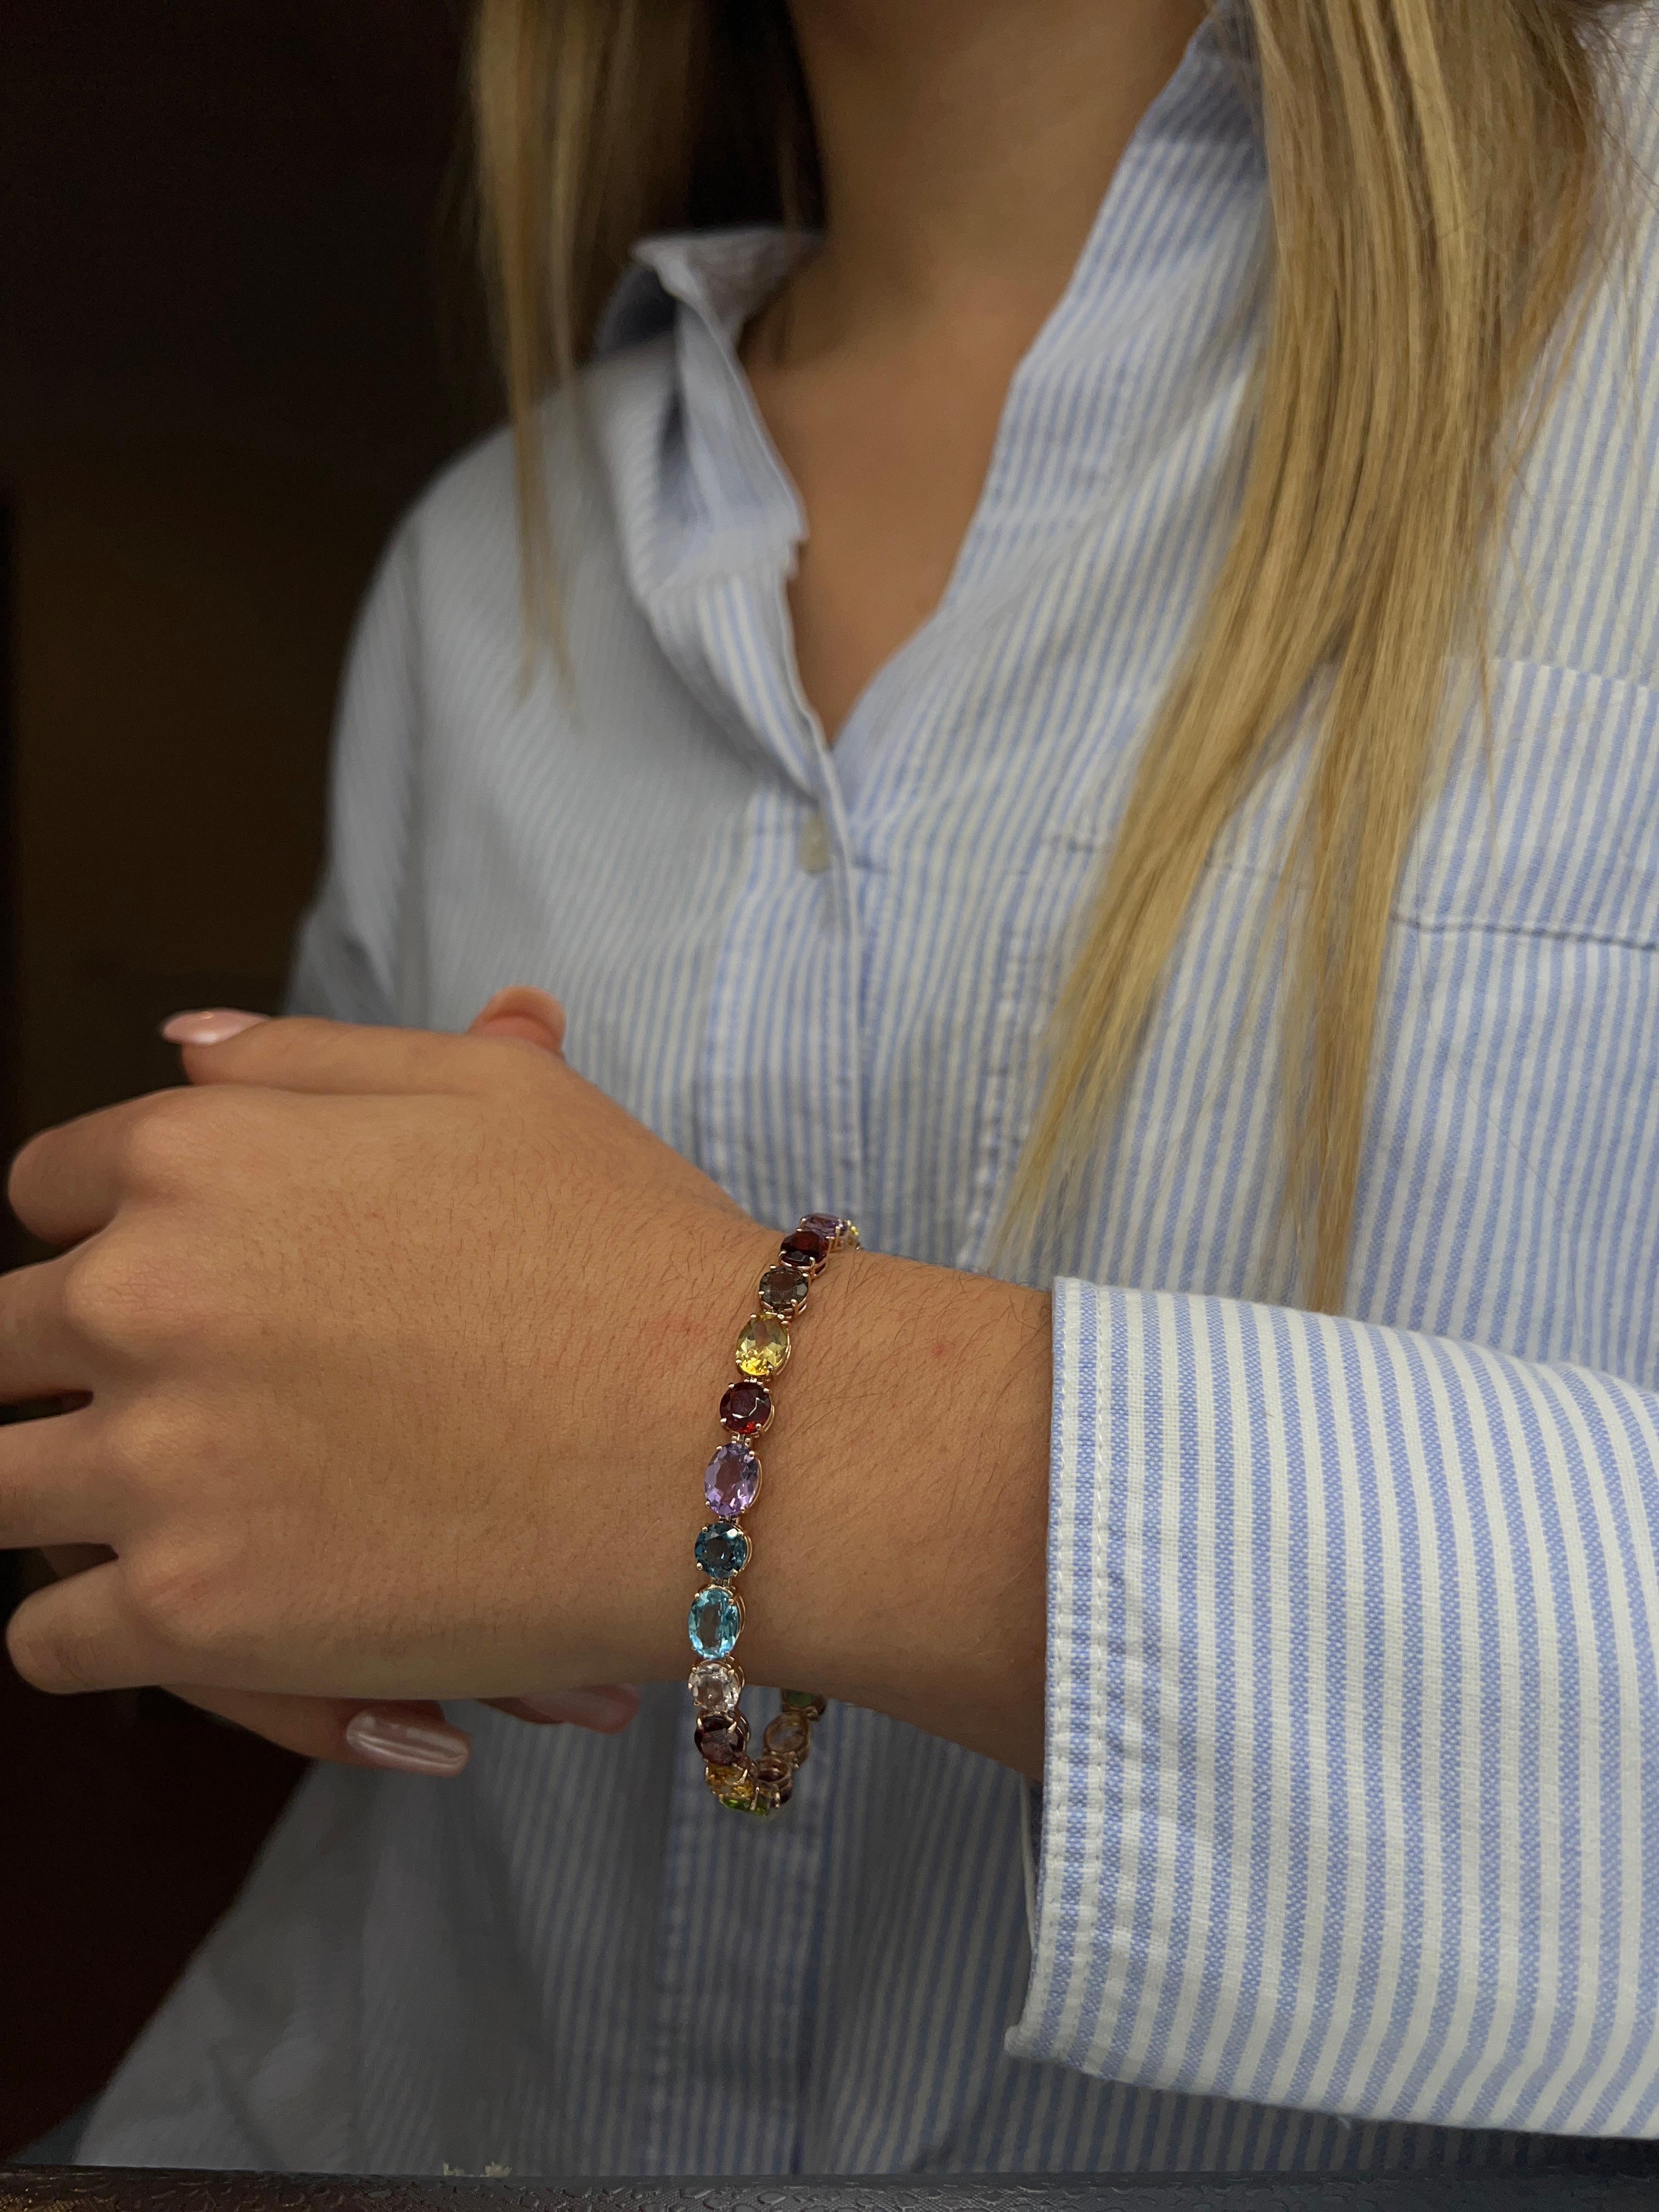 Soft 18k Gold Bracelet with Amethyst, Morganite and Garnet, Citrine, Topaze Blue London, Péridot, Aigue Marine, Blue Quartz

The bracelet is articulated, including a closure with a double security alternated with round and oval stones. The color,